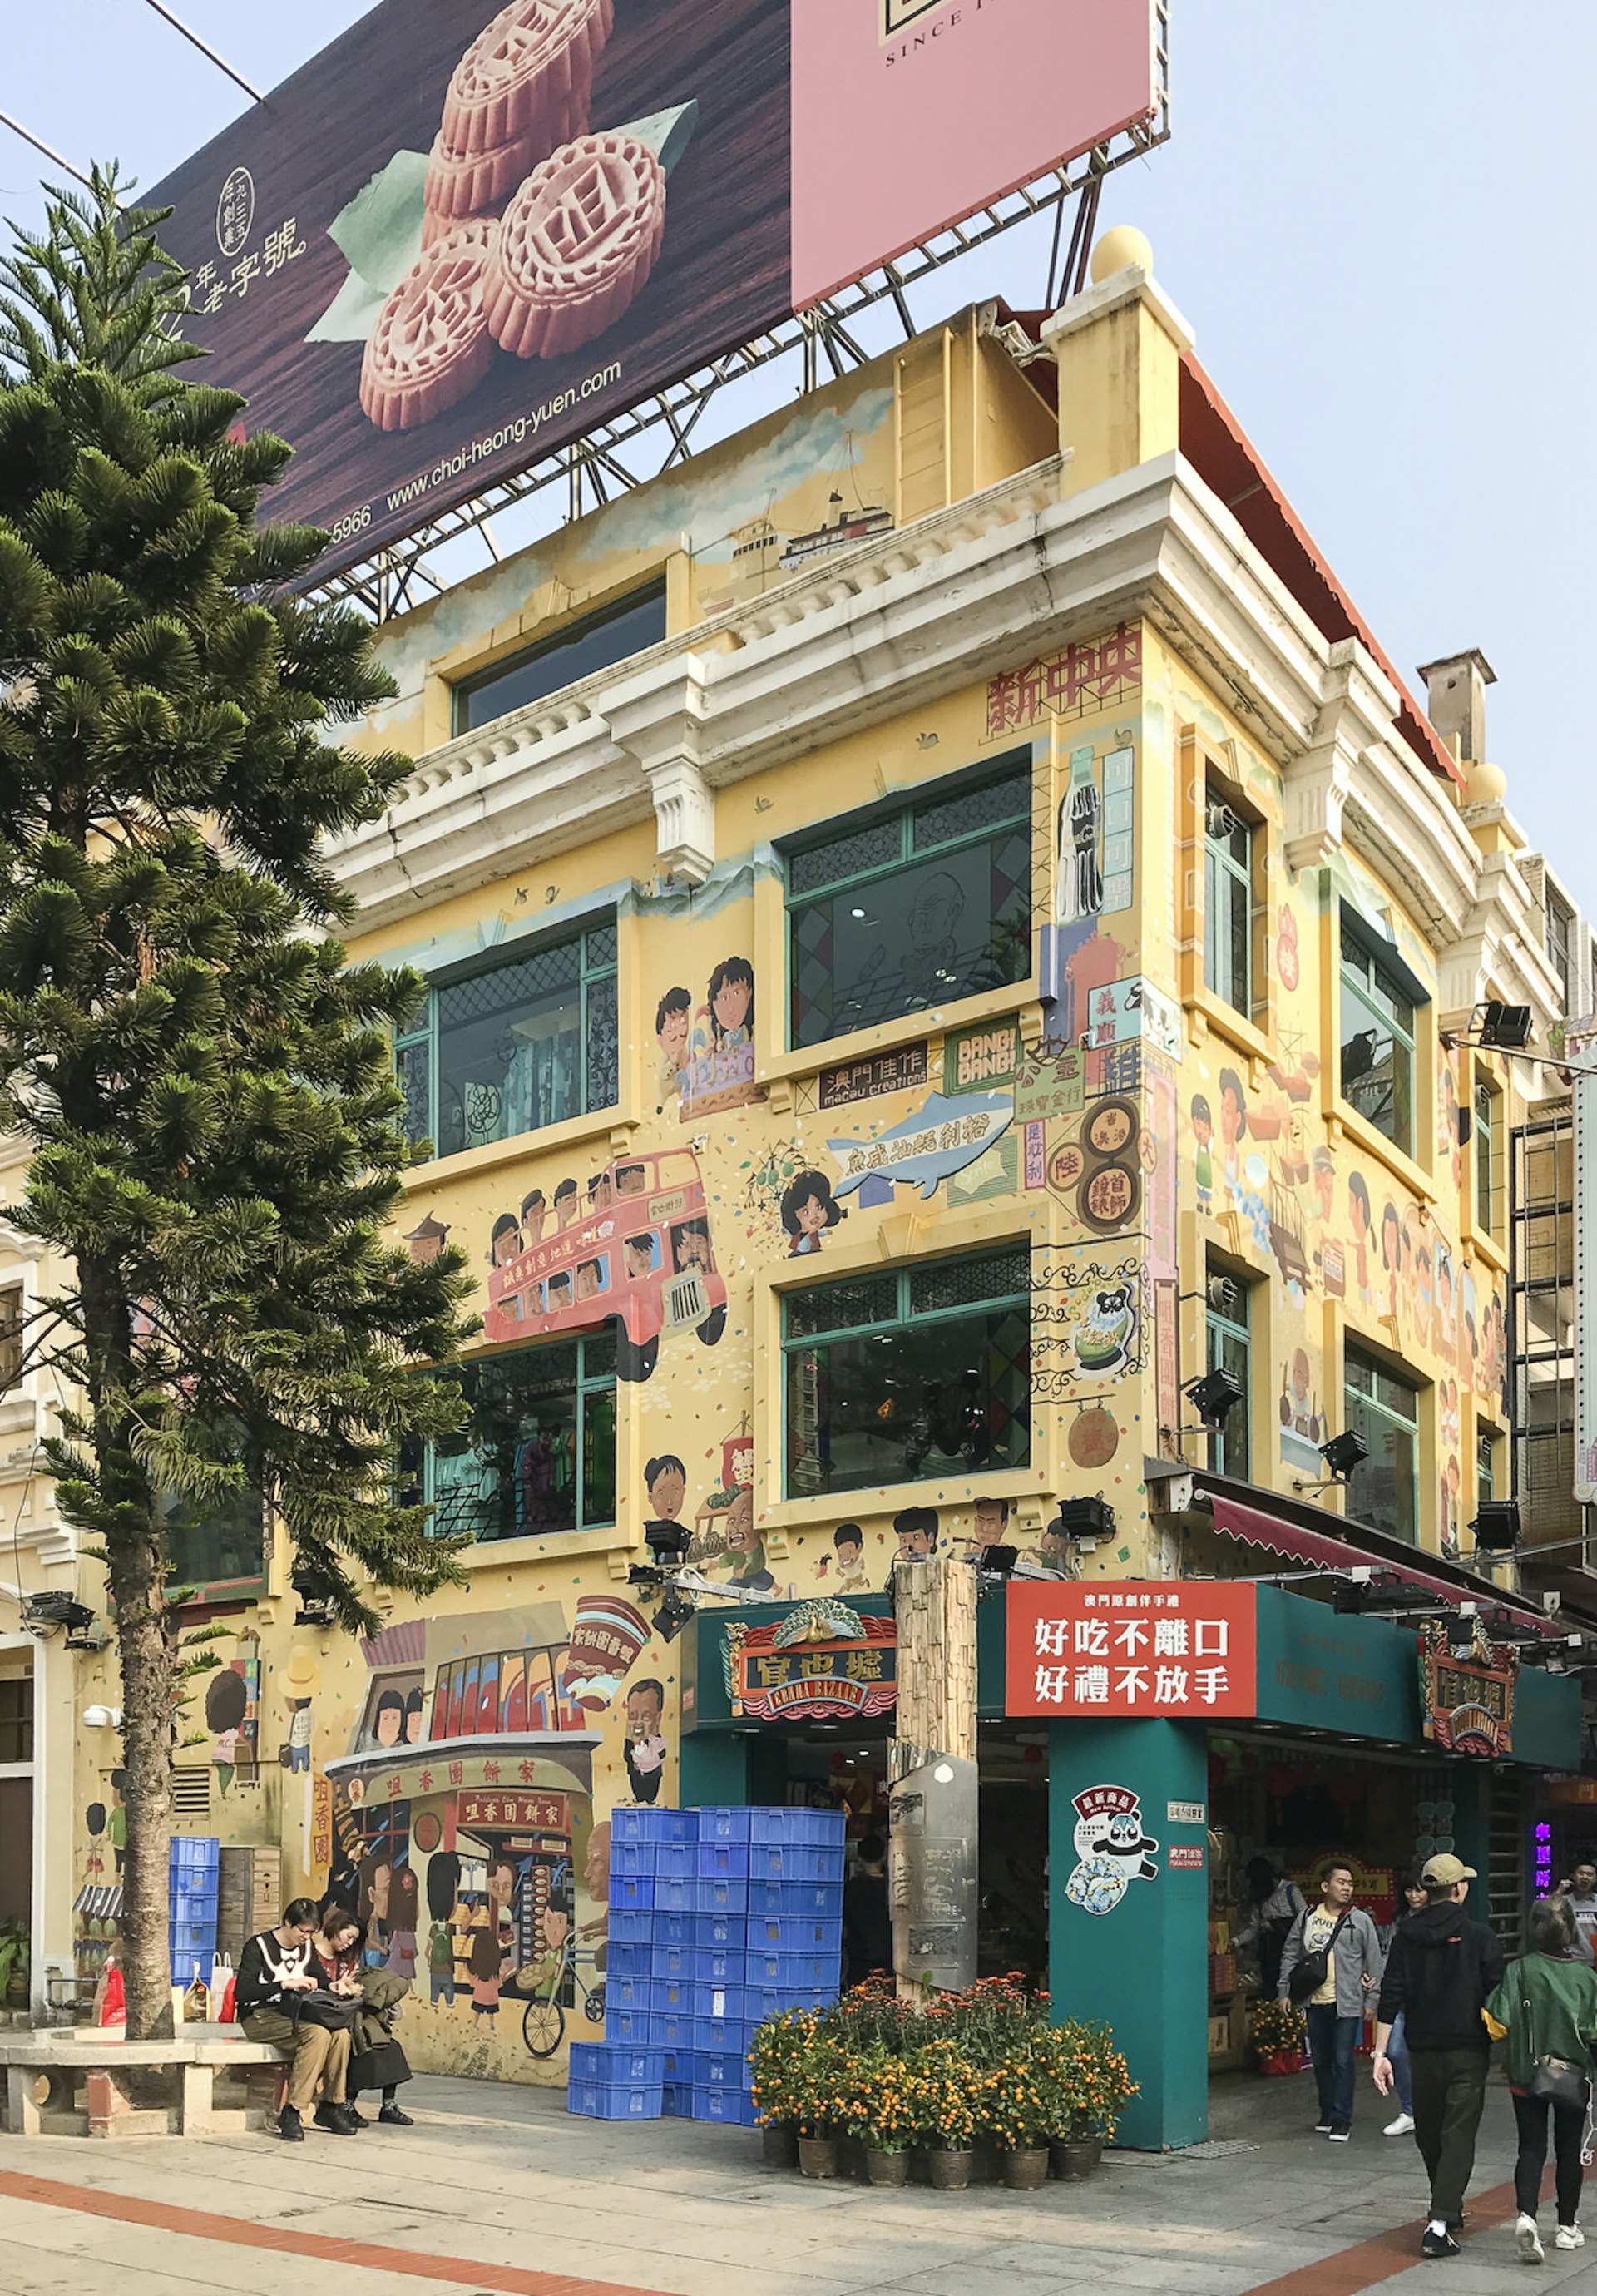 Taipa retains the flavour of old Macau through its local shops and restaurants